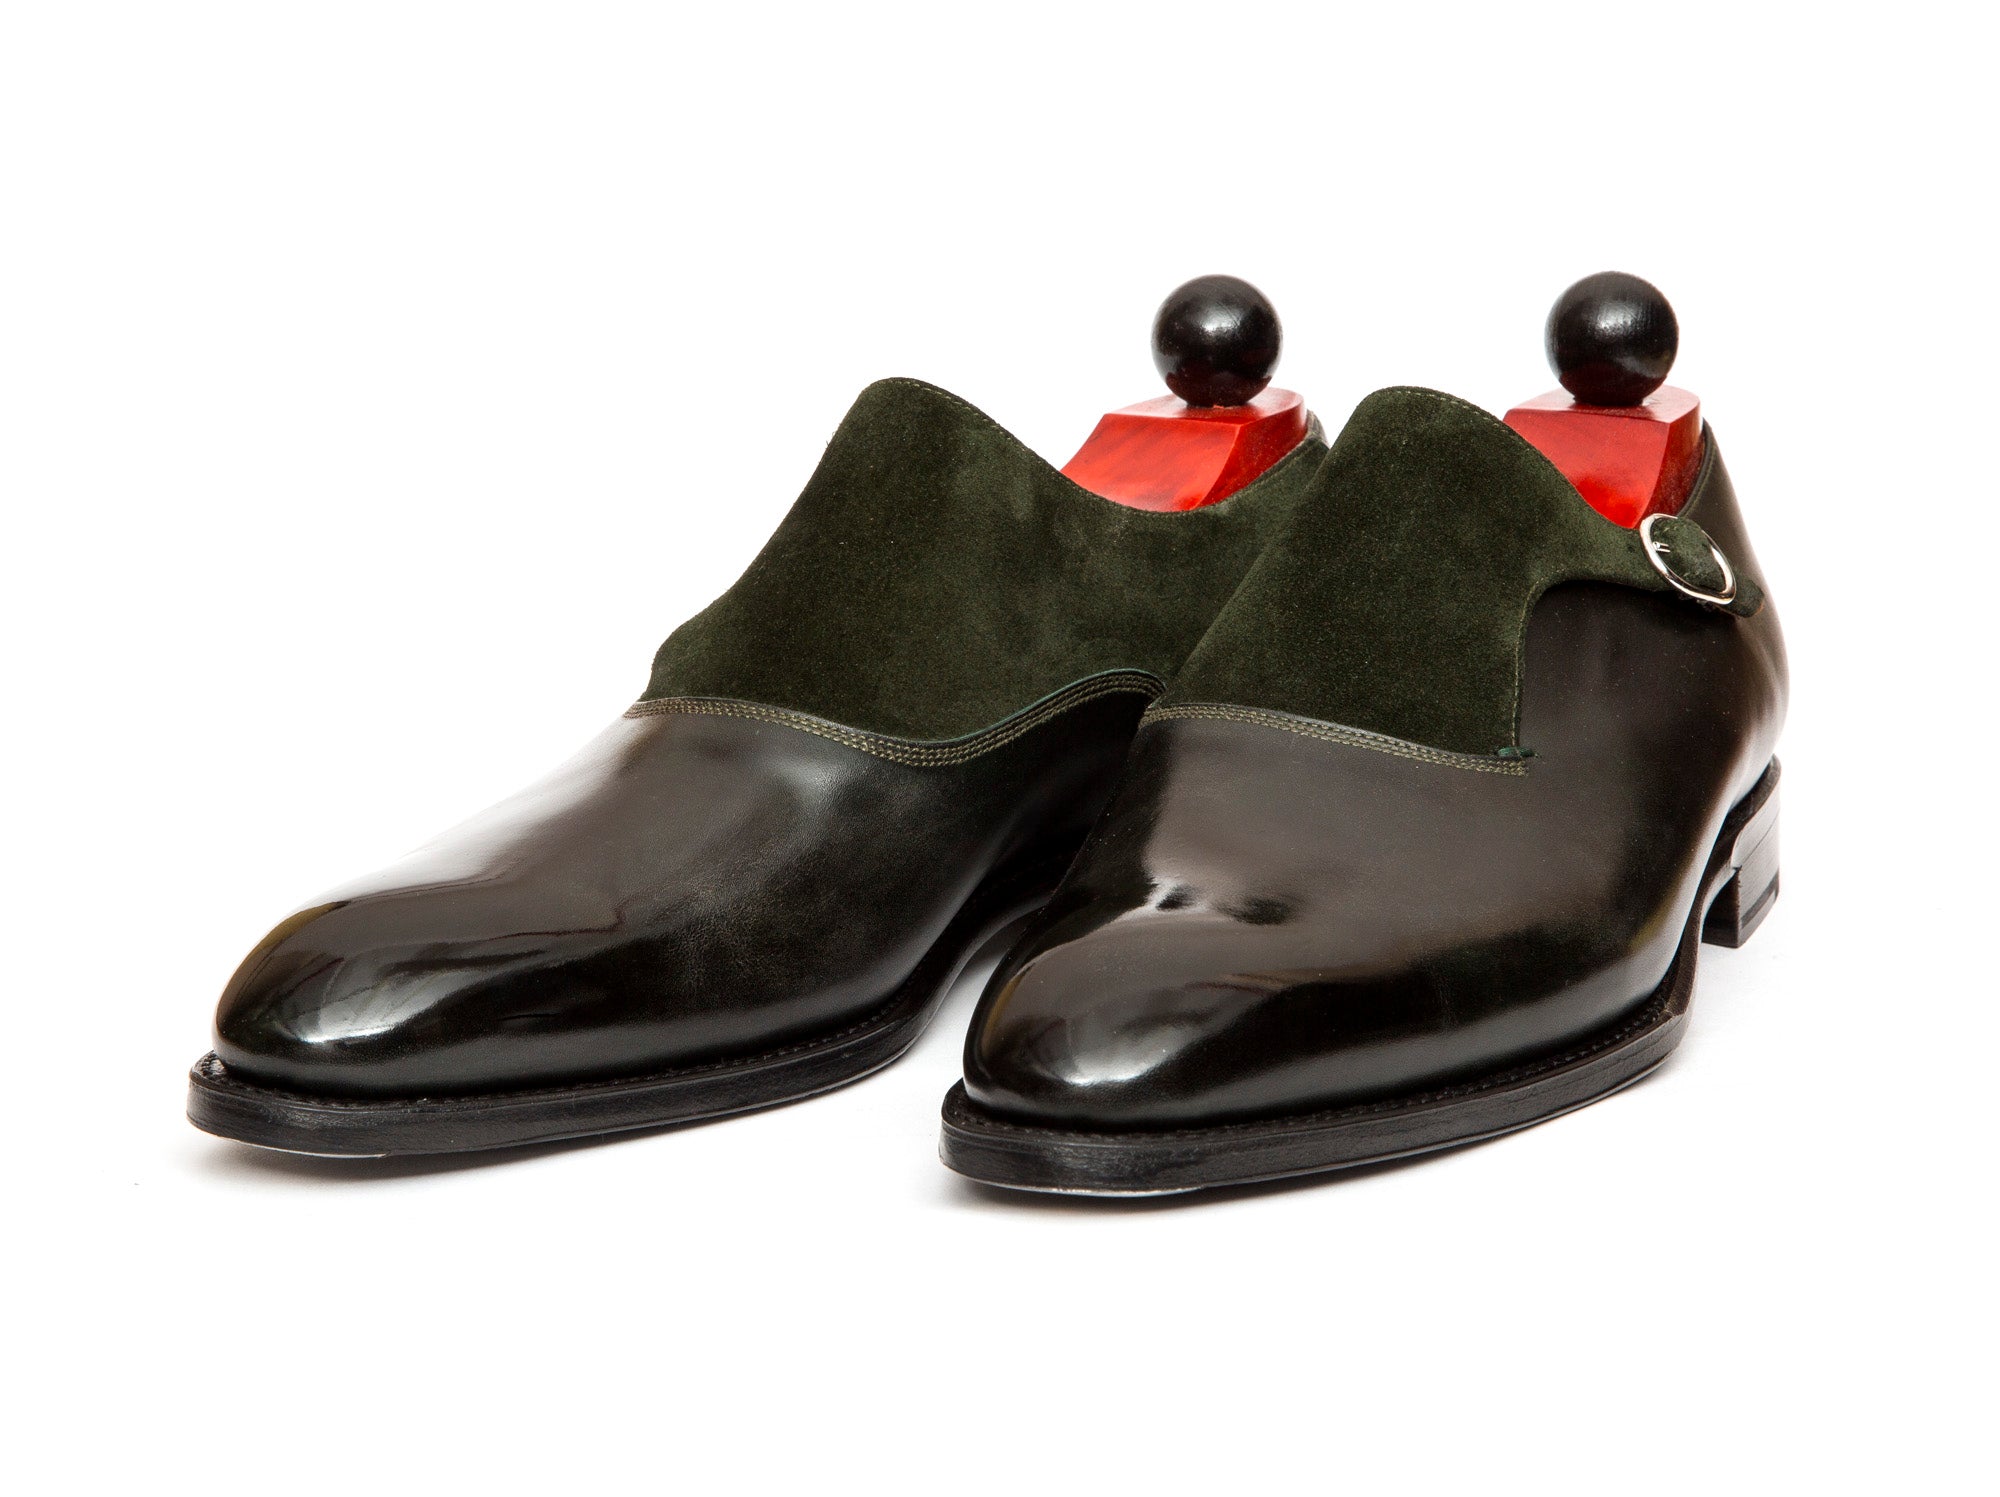 Madrona - MTO - Dark Green Museum Calf / Forest Green Suede - NGT Last - Single Leather Sole